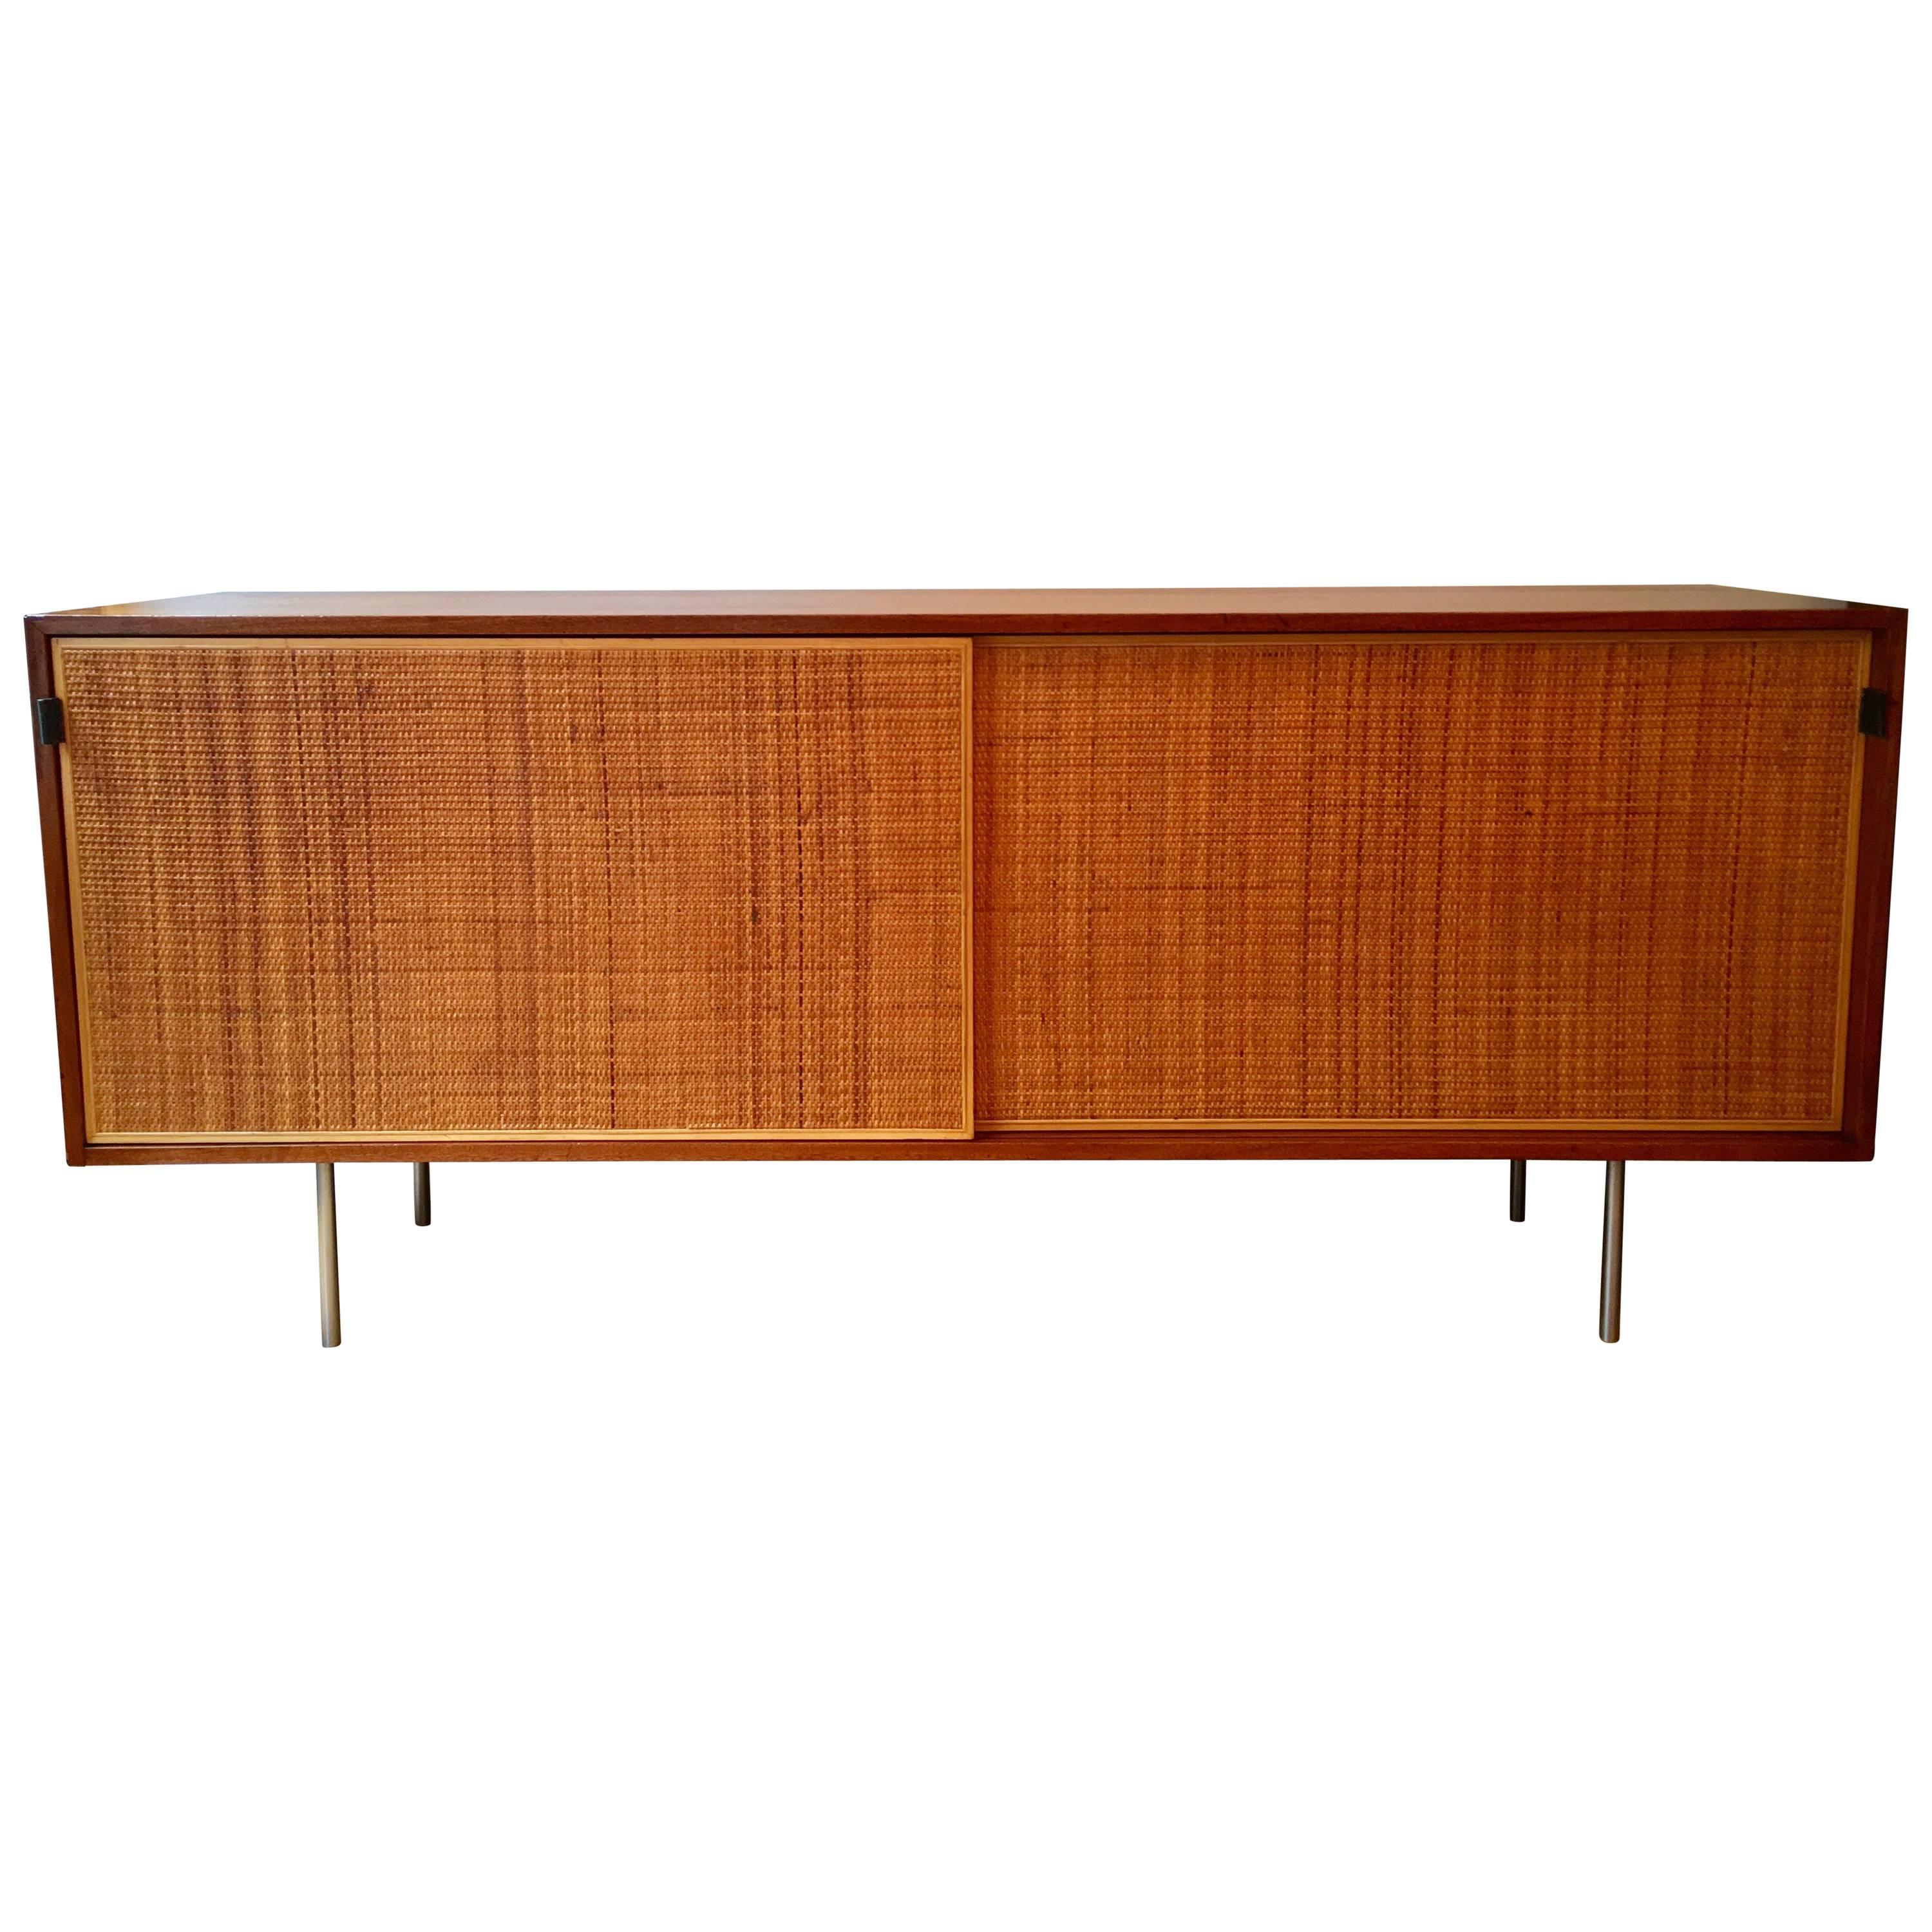 Florence Knoll Grasscloth Walnut, 1950s Credenza Cabinet